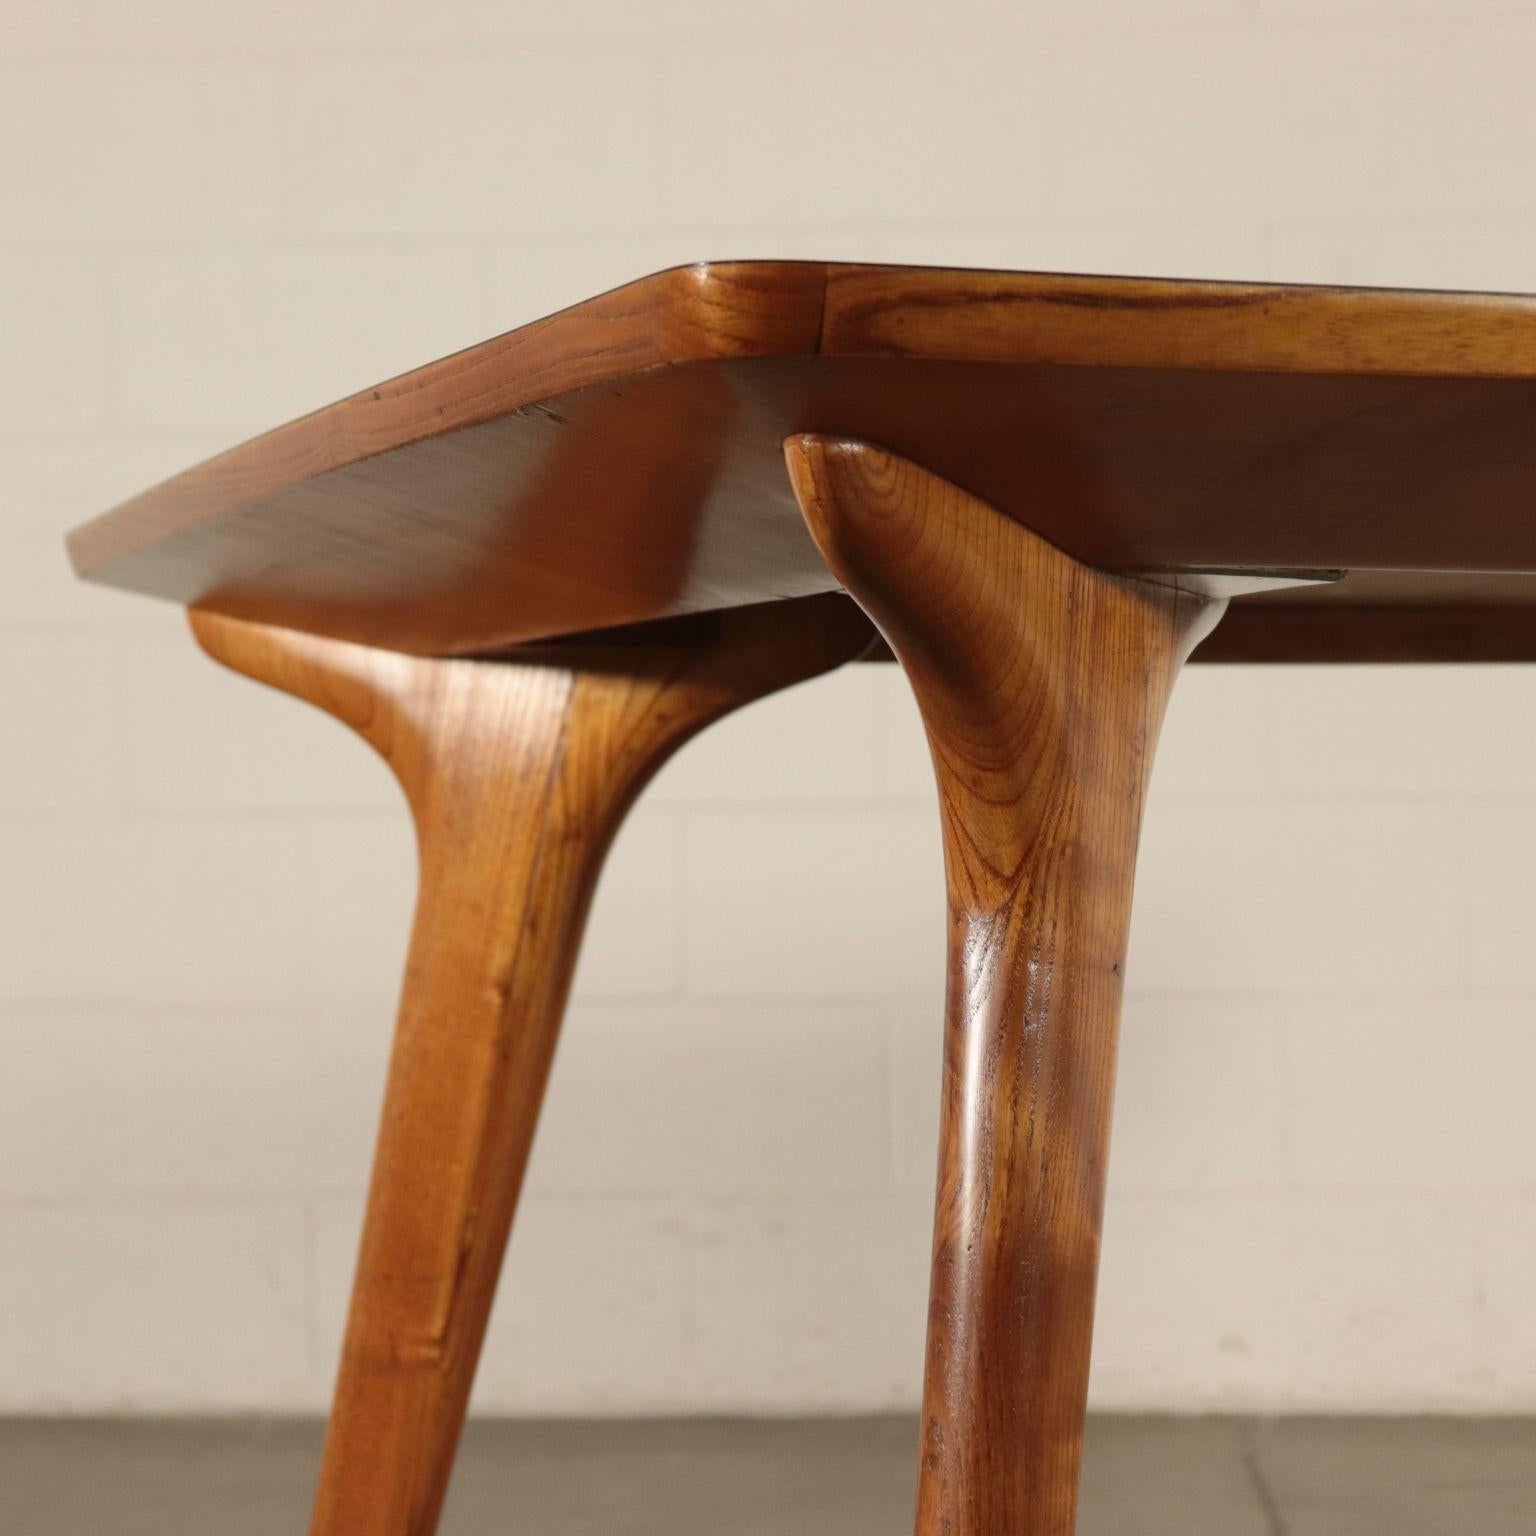 Mid-Century Modern Table, Beech and Formica, Italy 1950s Italian Production